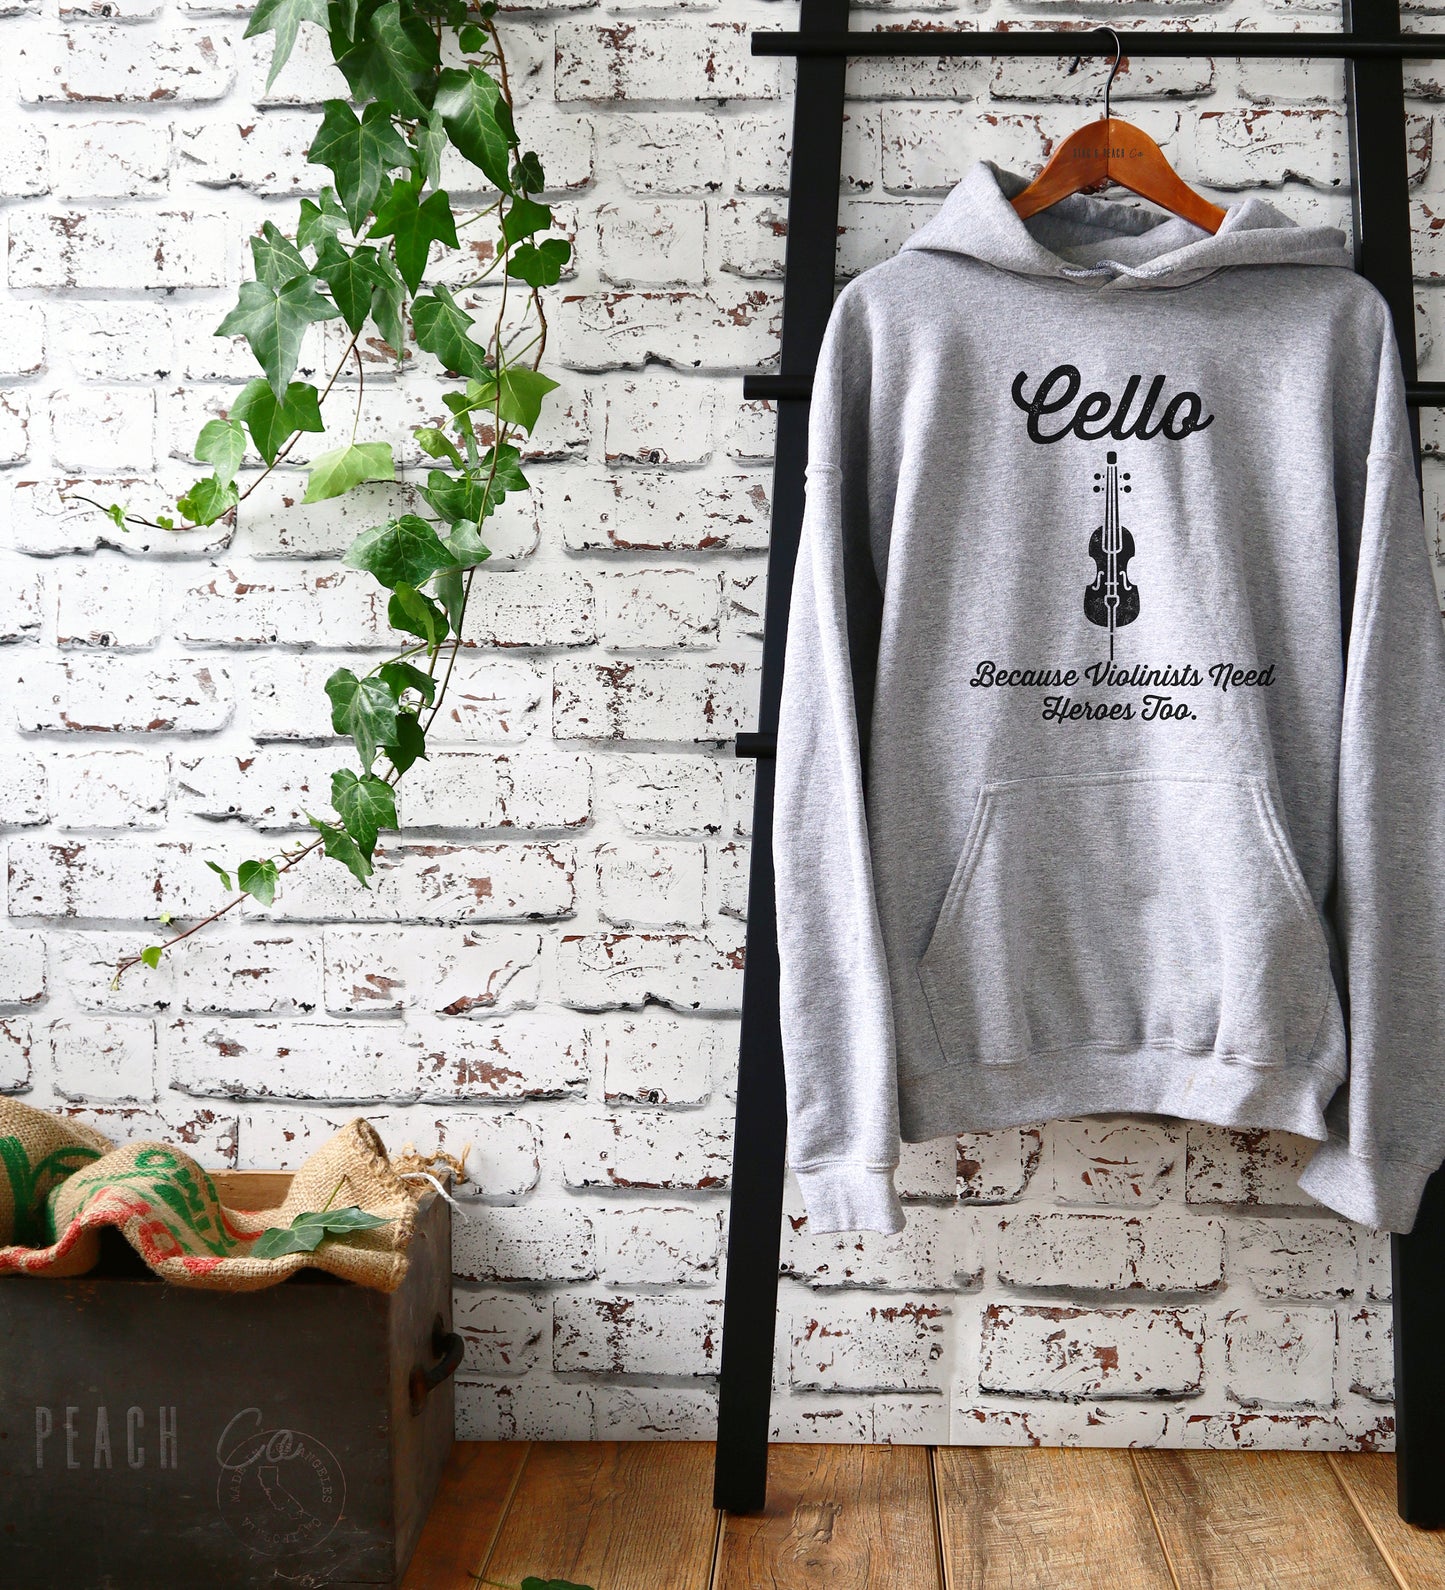 Cello Because Violinists Need Heroes Too Hoodie - Cello Shirt, Cello Hoodie, Cellist Shirt, Musician Gift, Music Shirt, Music Teacher Gift